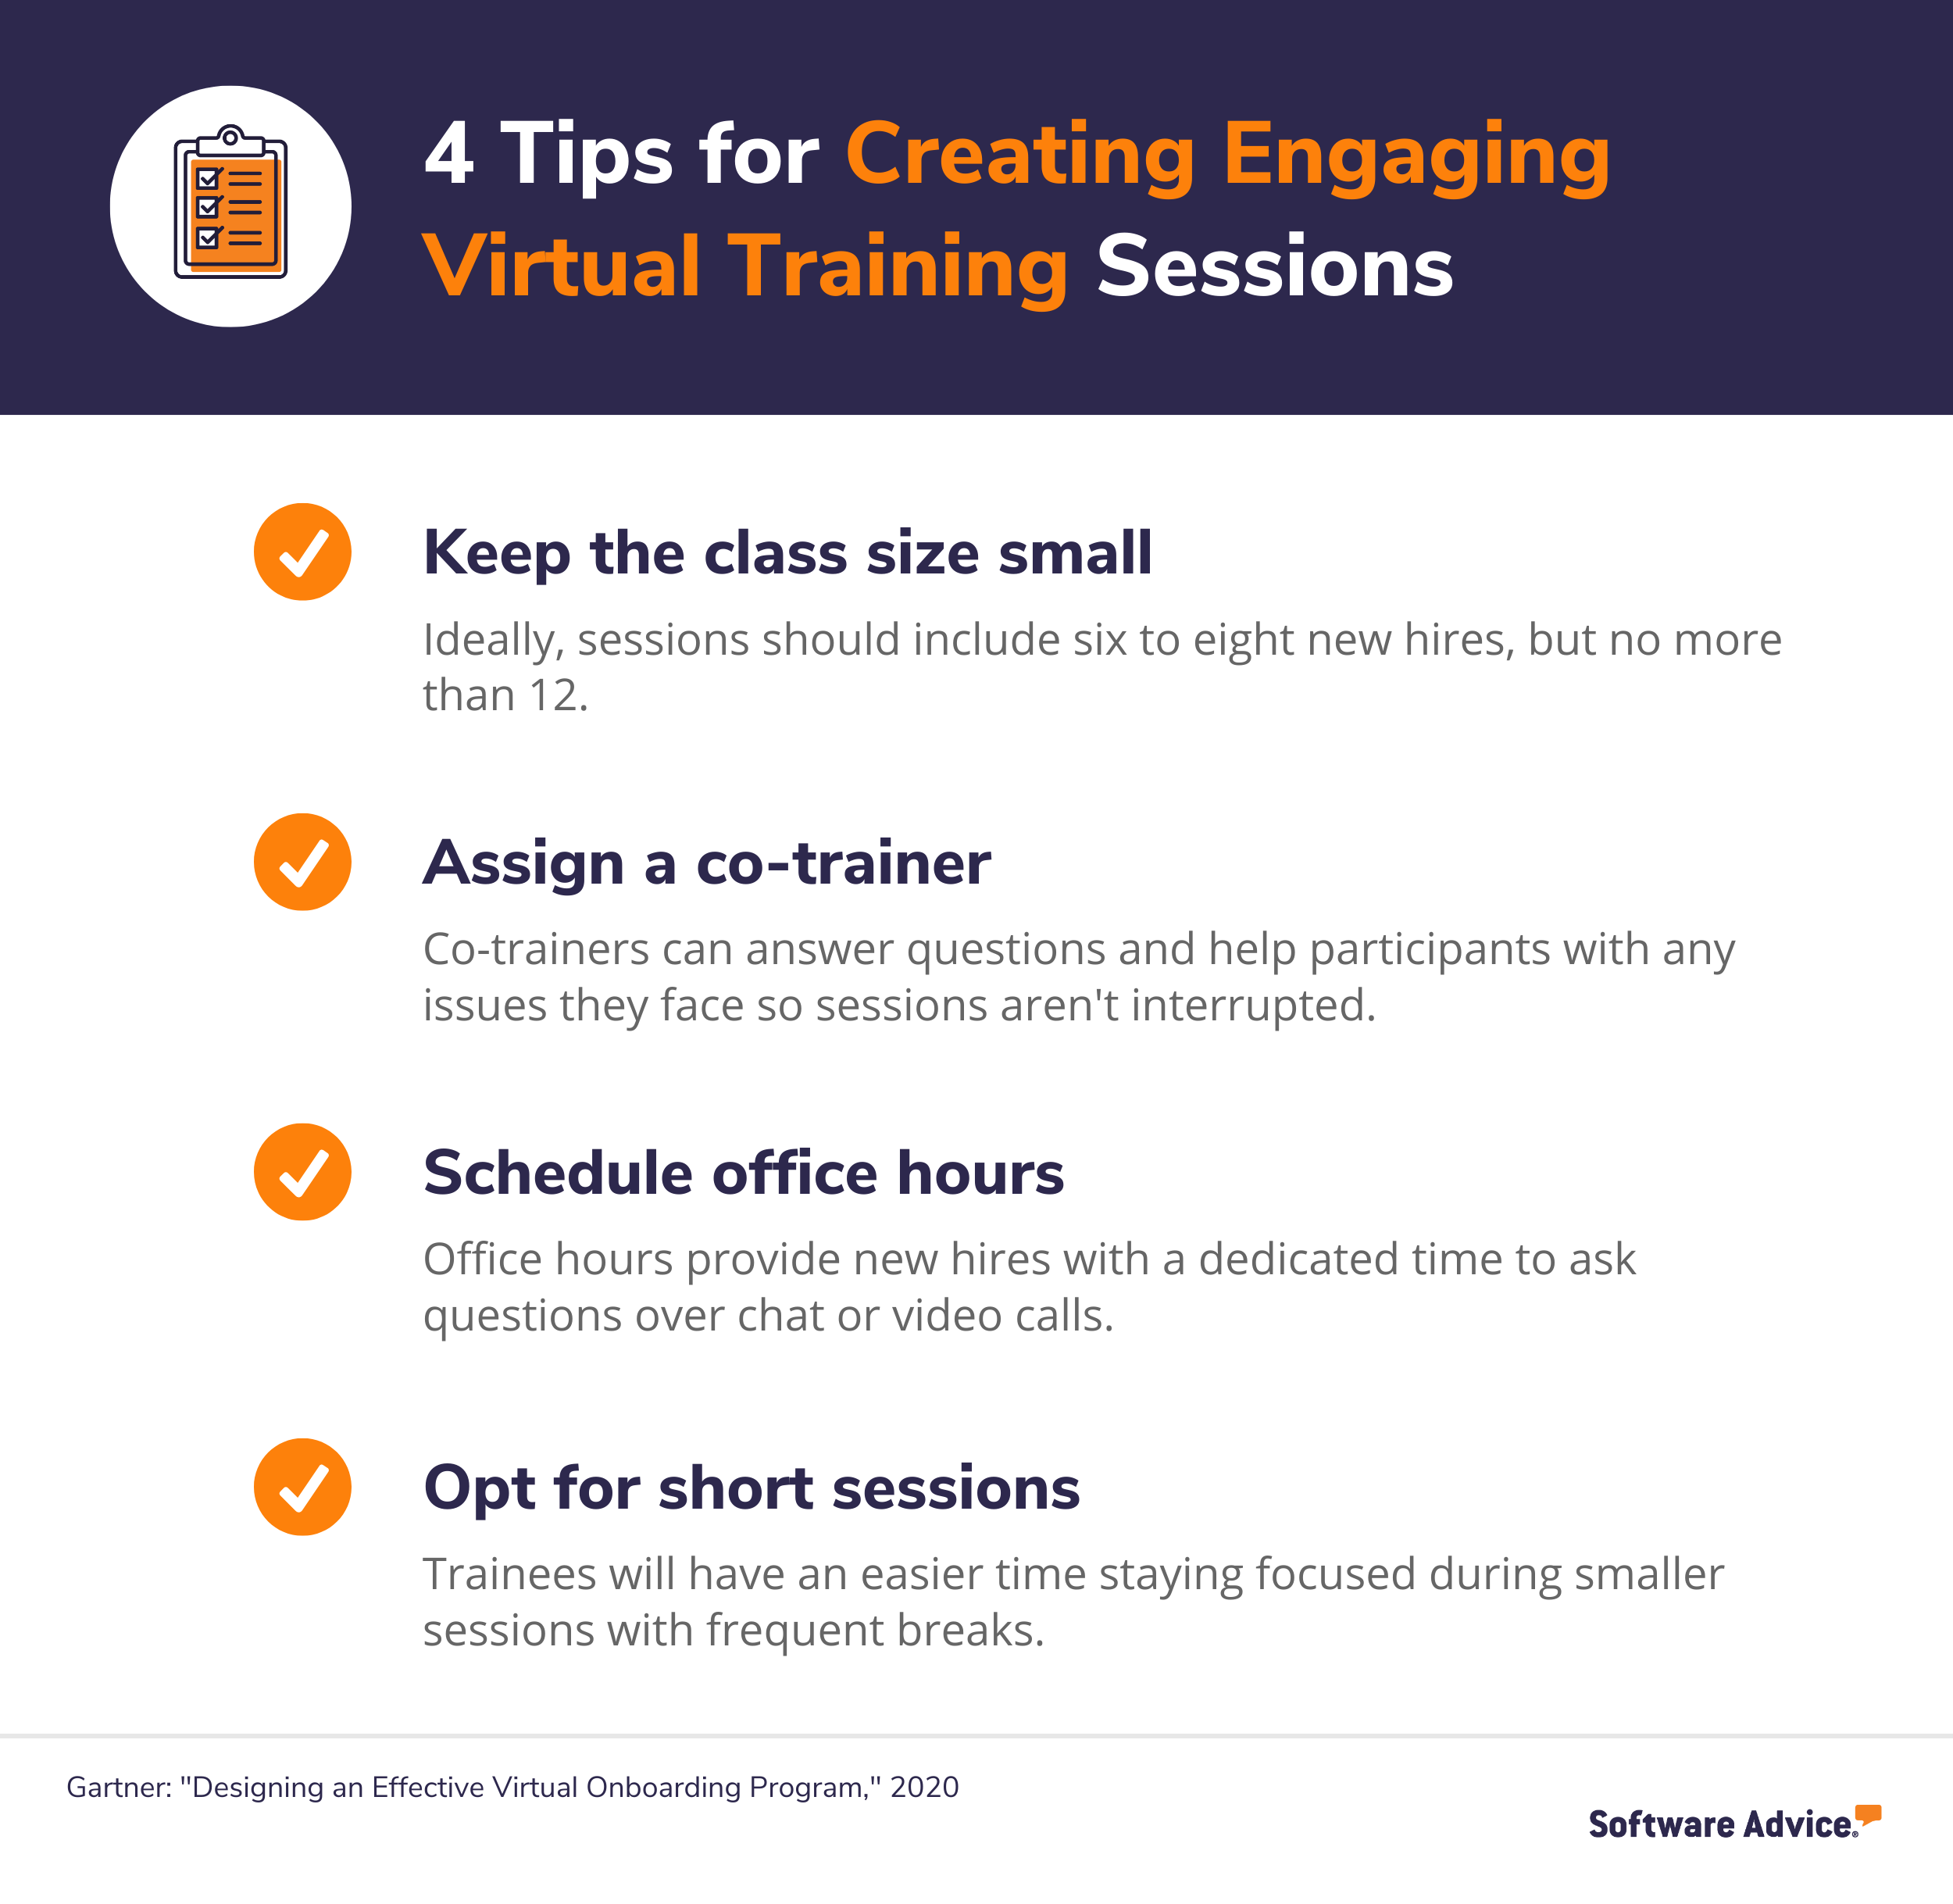 4-tips-for-creating-engaging-virtual-training-sessions